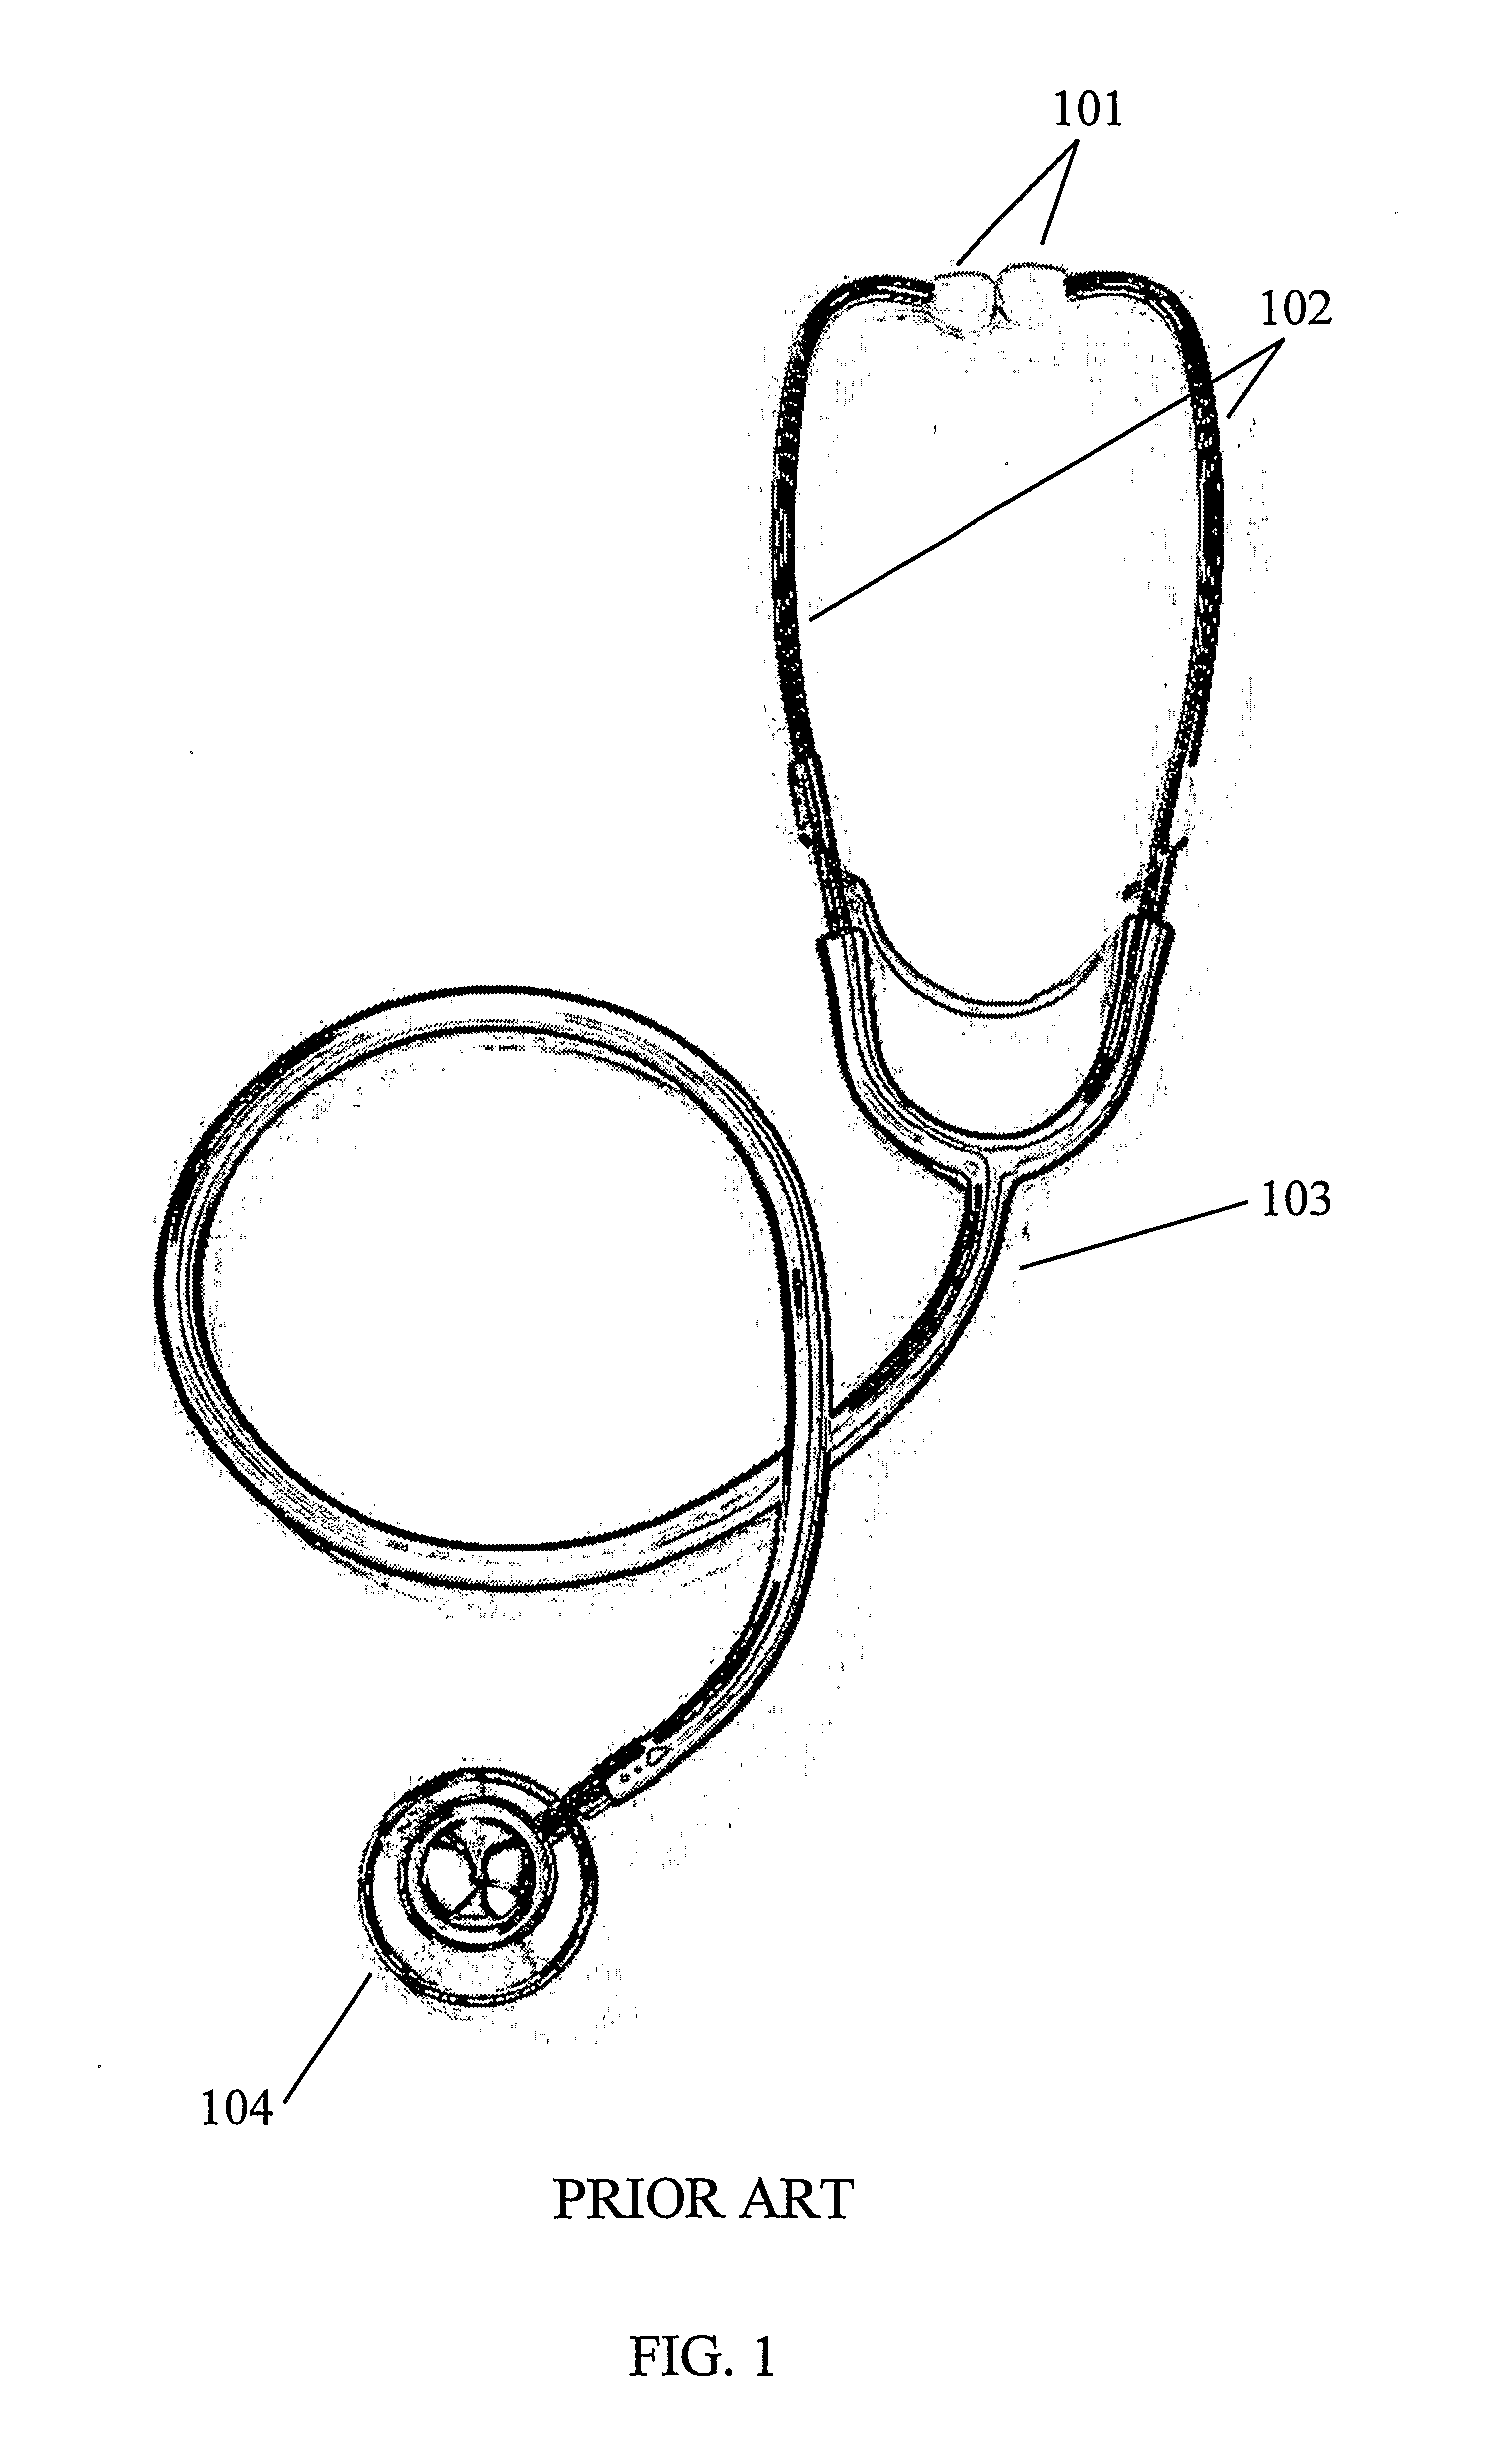 Stethoscope disinfection device